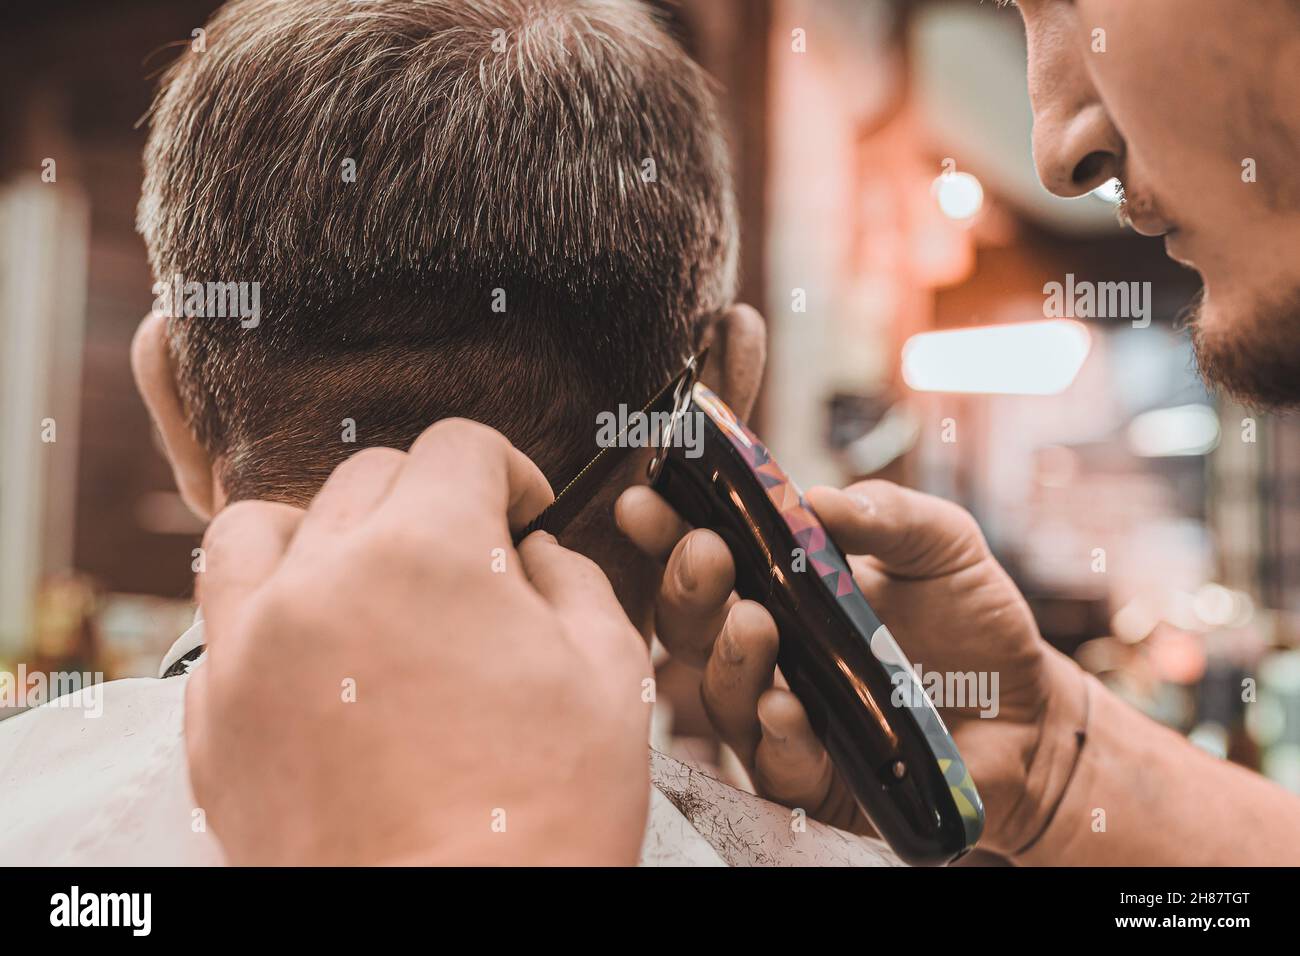 Barbershop. hairdresser professionally performs a haircut for men. man client sits in professional barber chair, and hairdresser makes haircut. Stock Photo